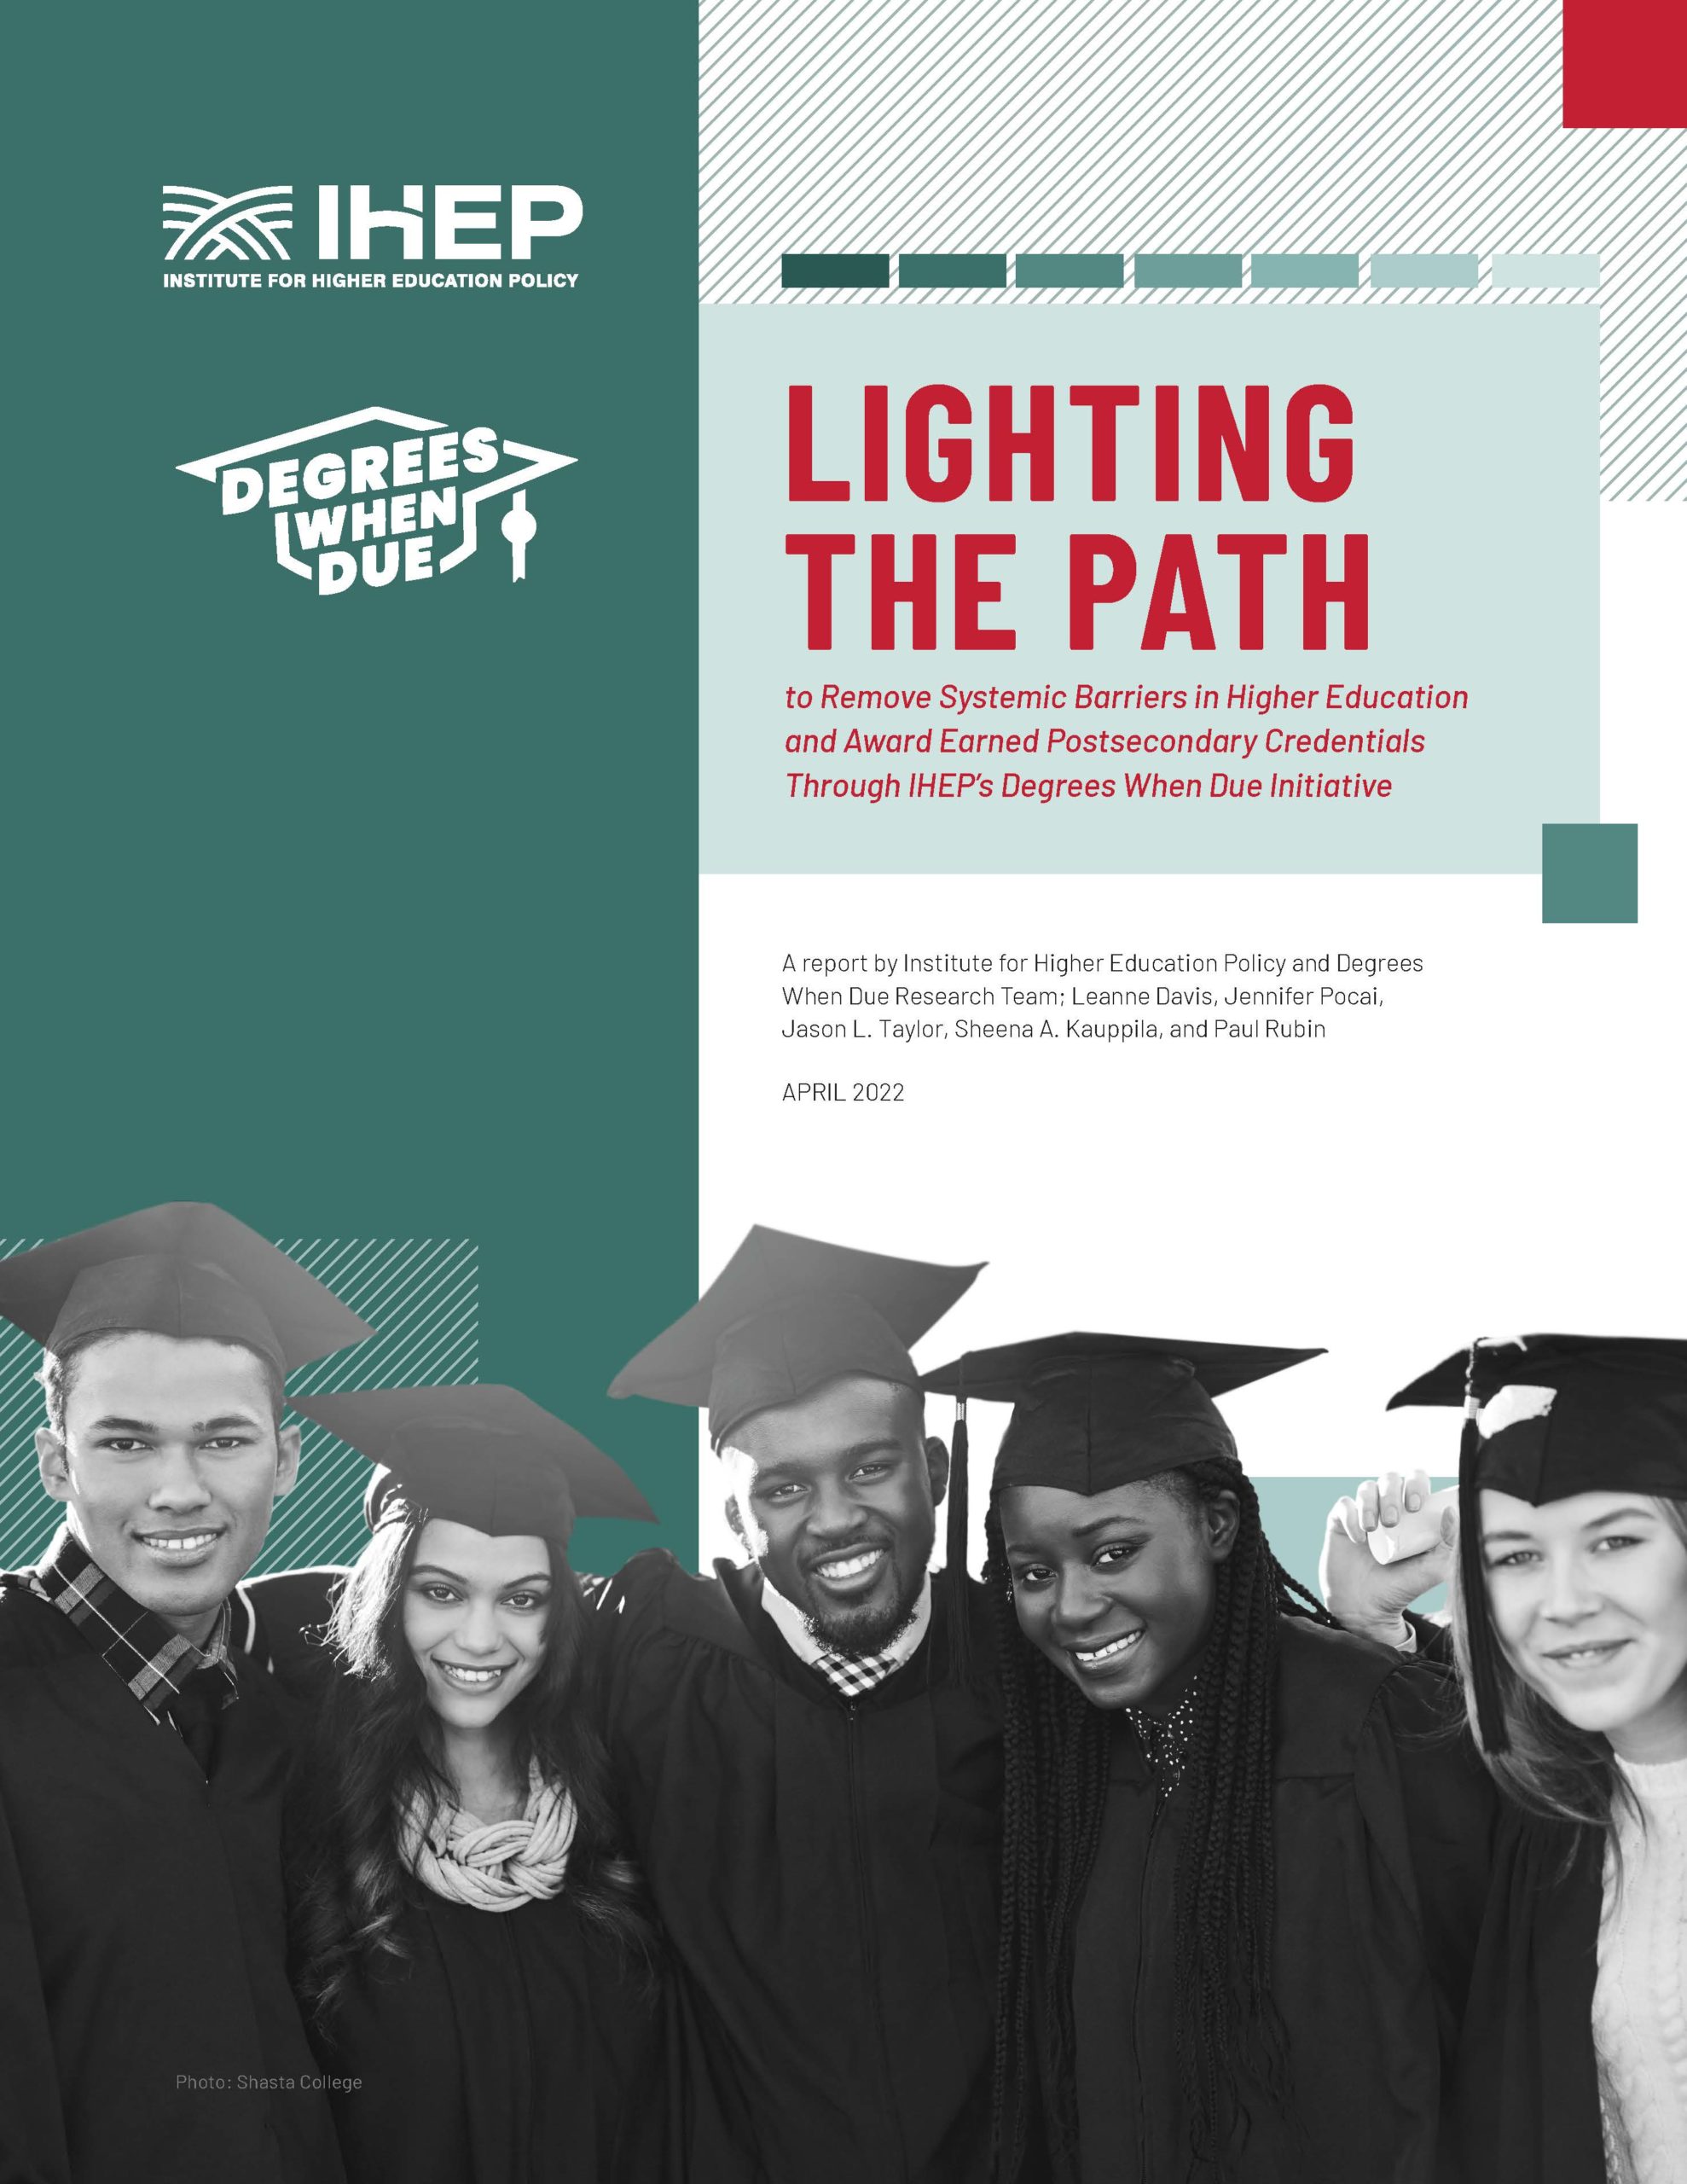 Lighting the Path to Remove Systemic Barriers in Higher Education and Award Earned Postsecondary Credentials through IHEP’s Degrees When Due Initiative